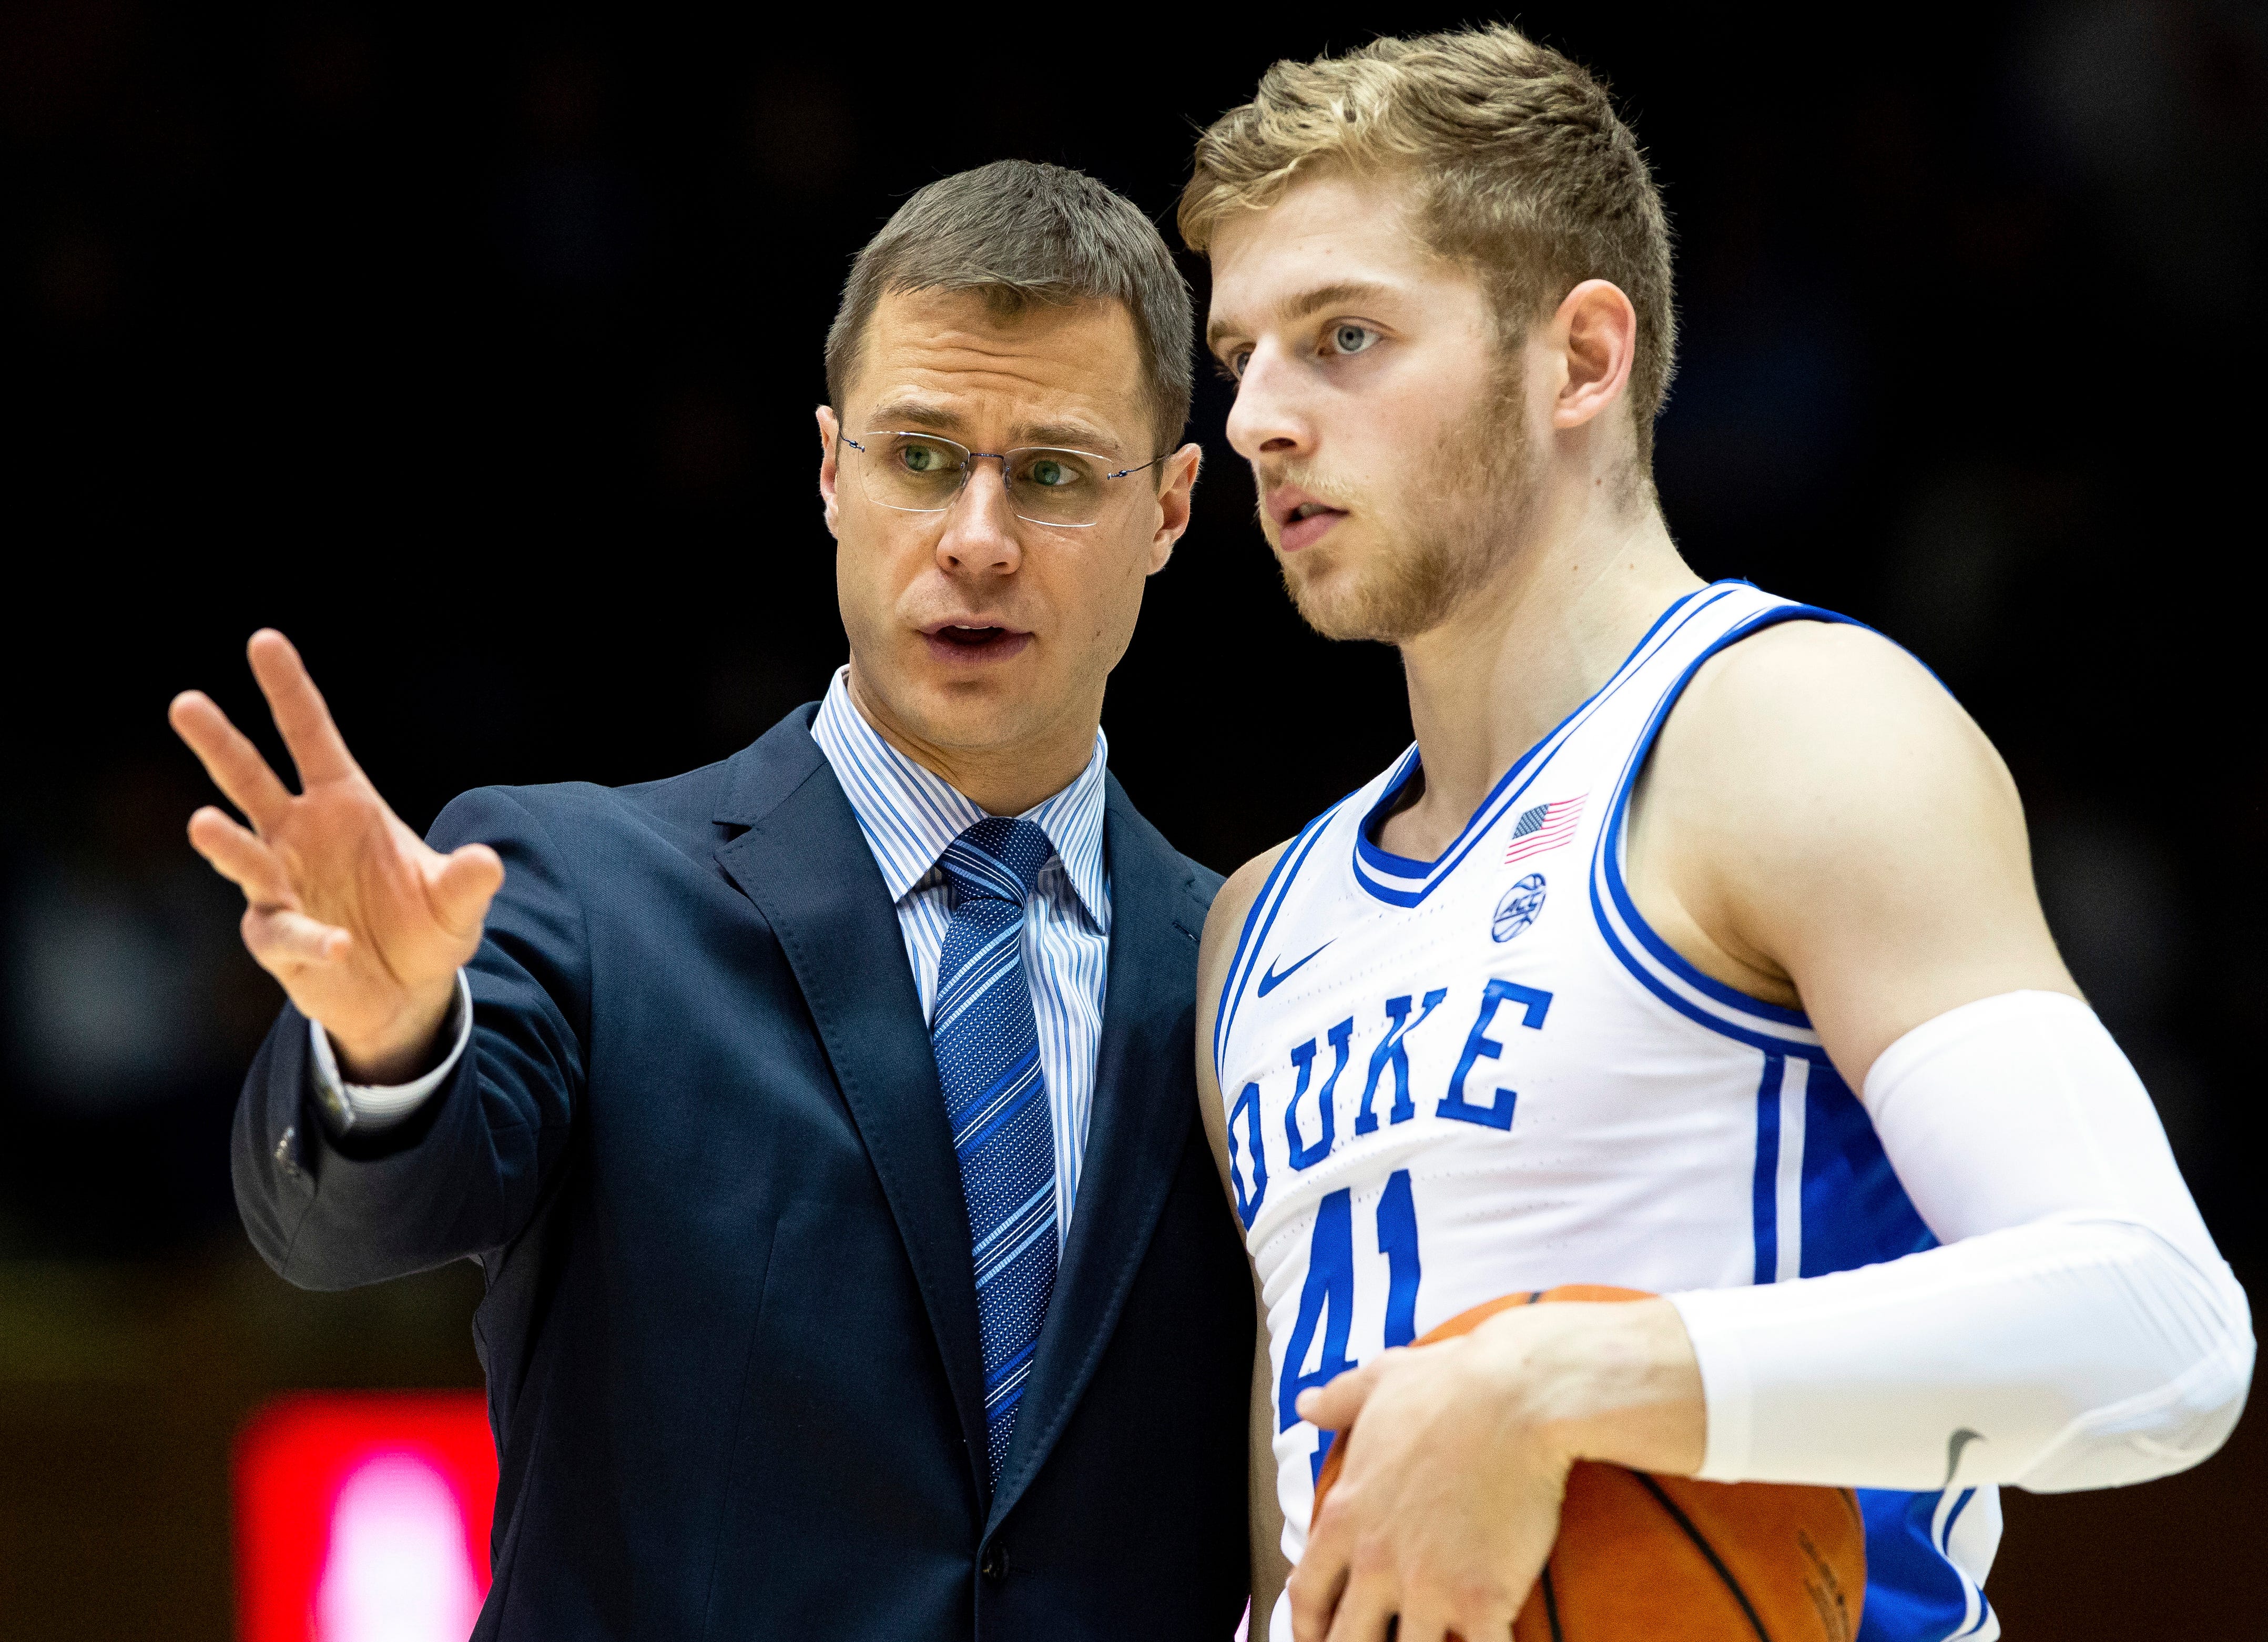 Mike Krzyzewski replacement at Duke may be a head-scratcher